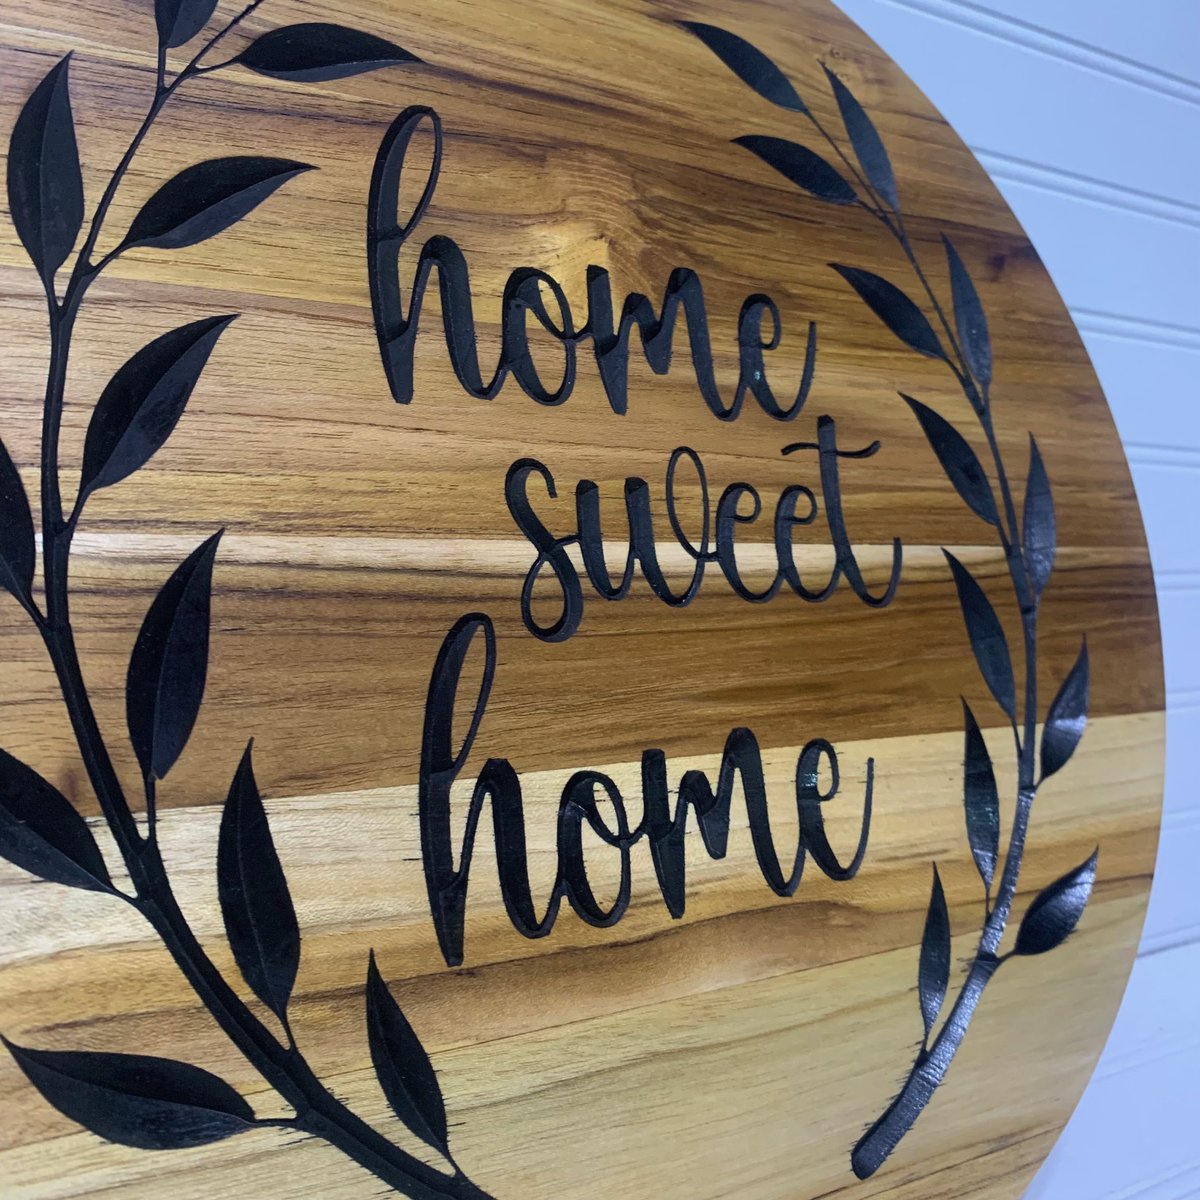 Home Sweet Home Hearts 15' Round Teak Wall Decor / Snack Board. Snack / cheese tray and stores as wall decor. 

Free Shipping - Check Us Out!
dobynsfamilycreations.com
dobynsfamcreations.etsy.com

#kitchendecor #decorate #kitchenware #homesweethome